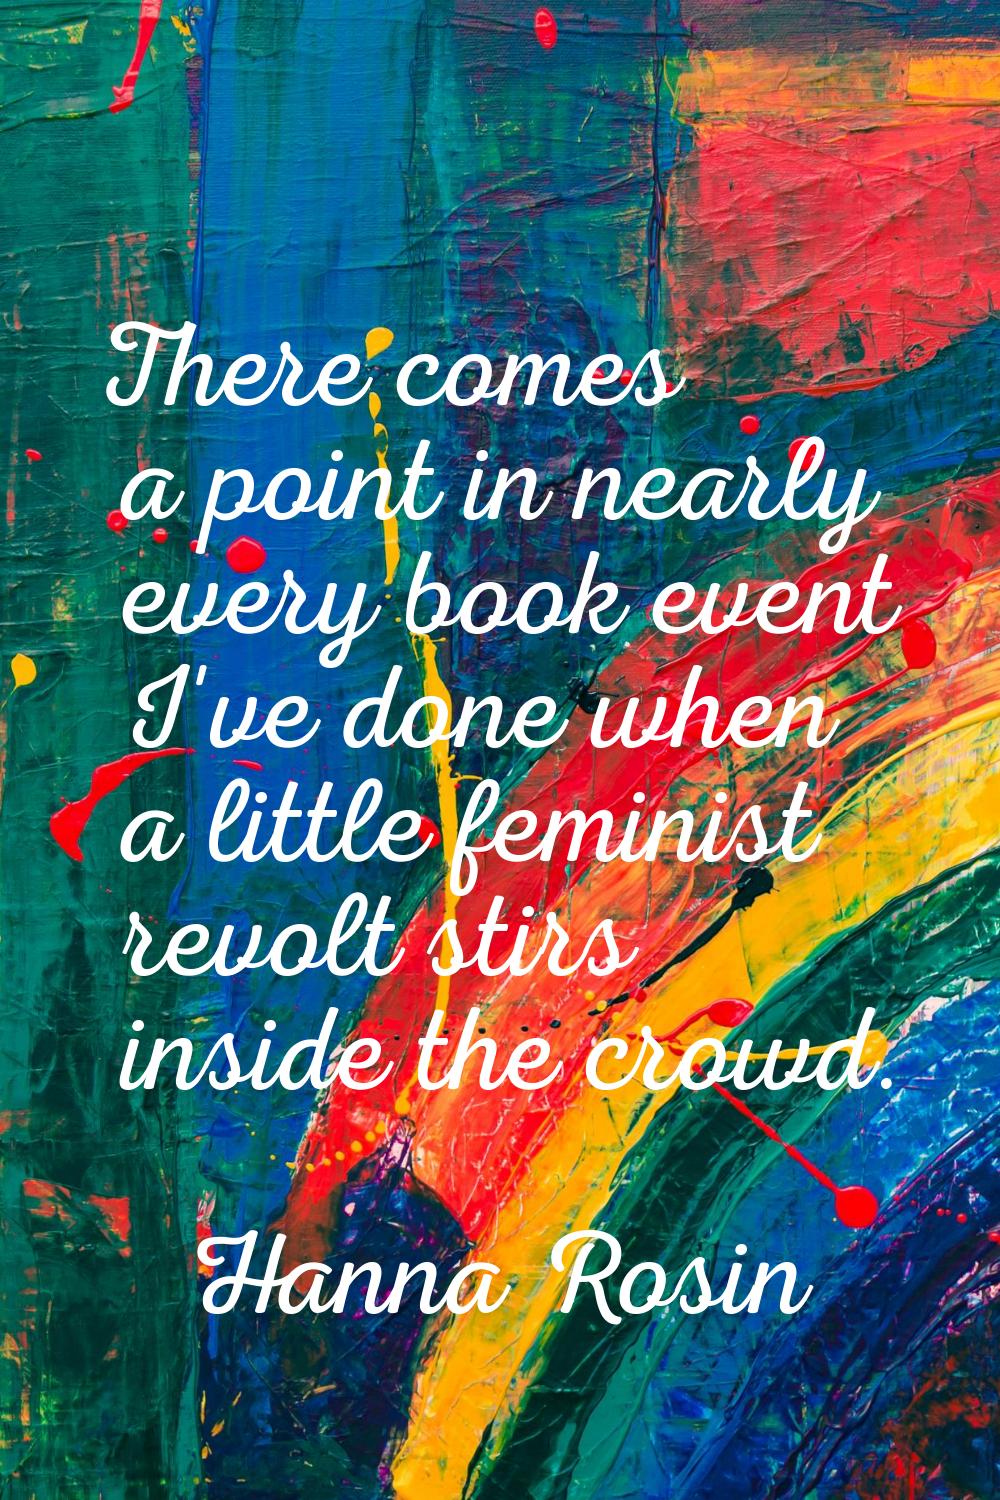 There comes a point in nearly every book event I've done when a little feminist revolt stirs inside